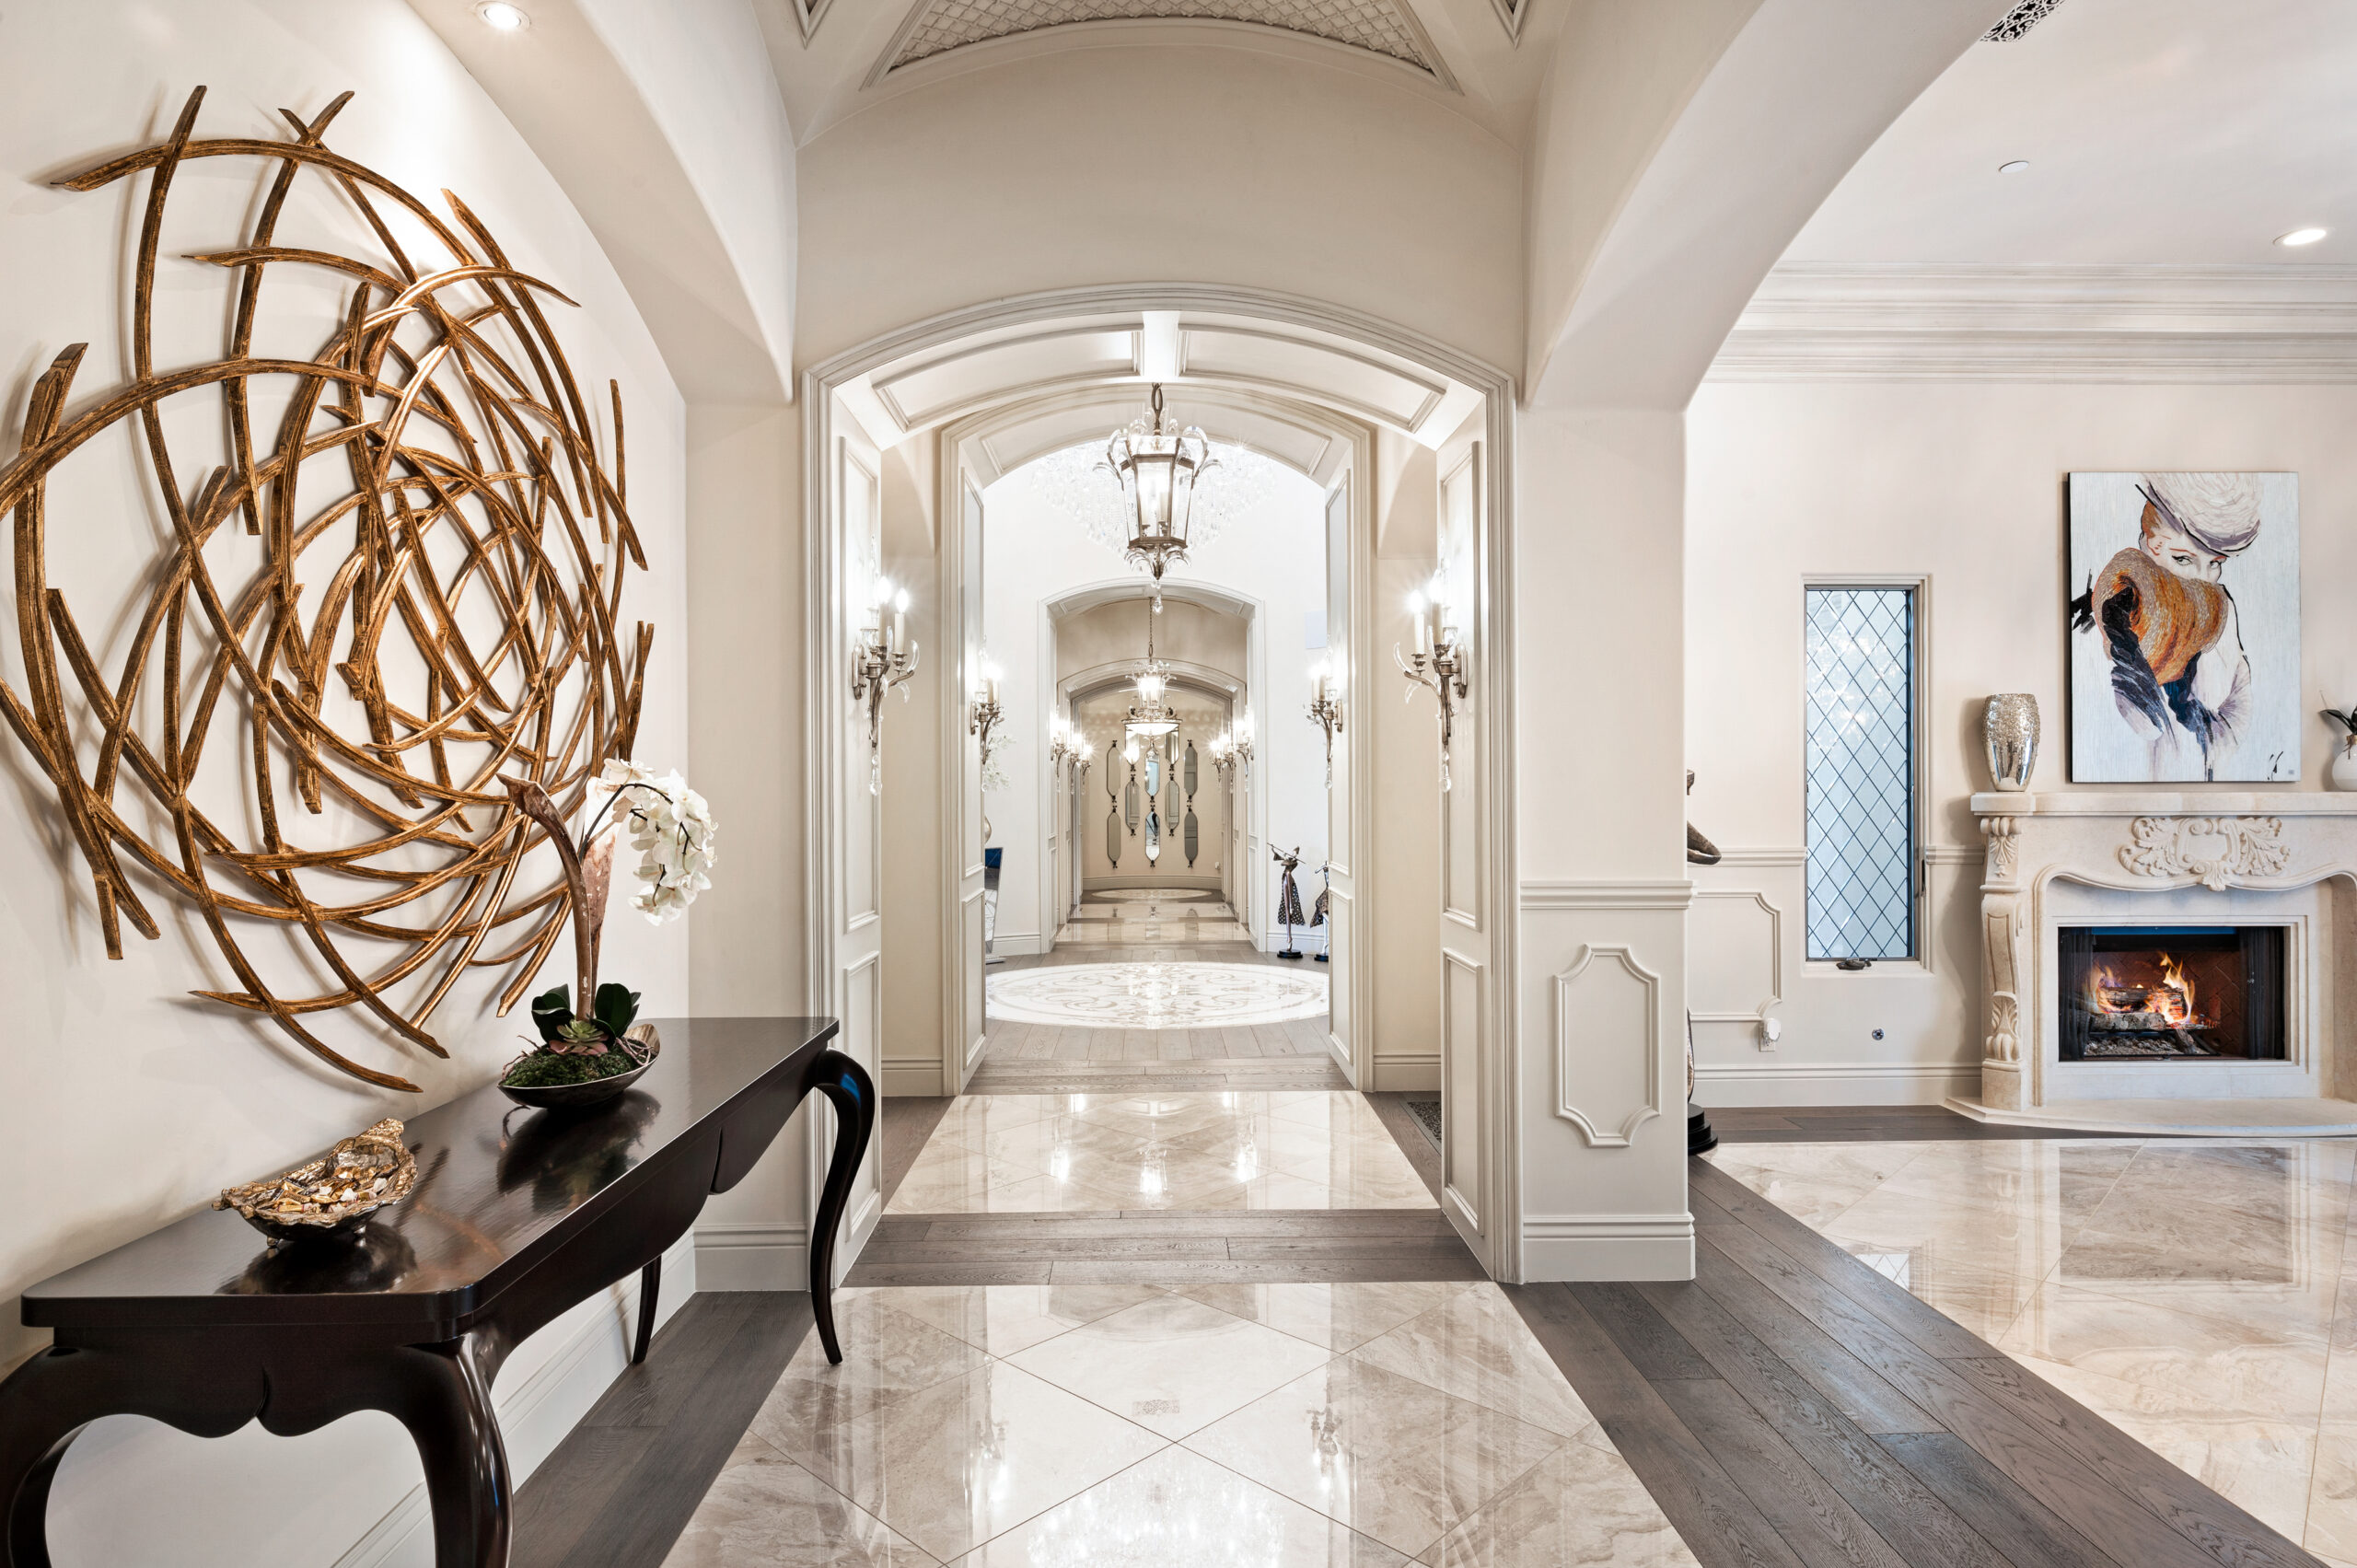 An elegant hallway featuring a stunning gold abstract wall sculpture on the left wall, adding a modern artistic touch. A dark wood console table beneath the sculpture is adorned with decorative items and a small potted plant. The hallway leads to a grand archway, highlighting the luxurious design with marble flooring and soft lighting from wall sconces and ceiling fixtures. In the background, an open space reveals a cozy living area with a fireplace, and additional artwork, creating a warm and inviting atmosphere.